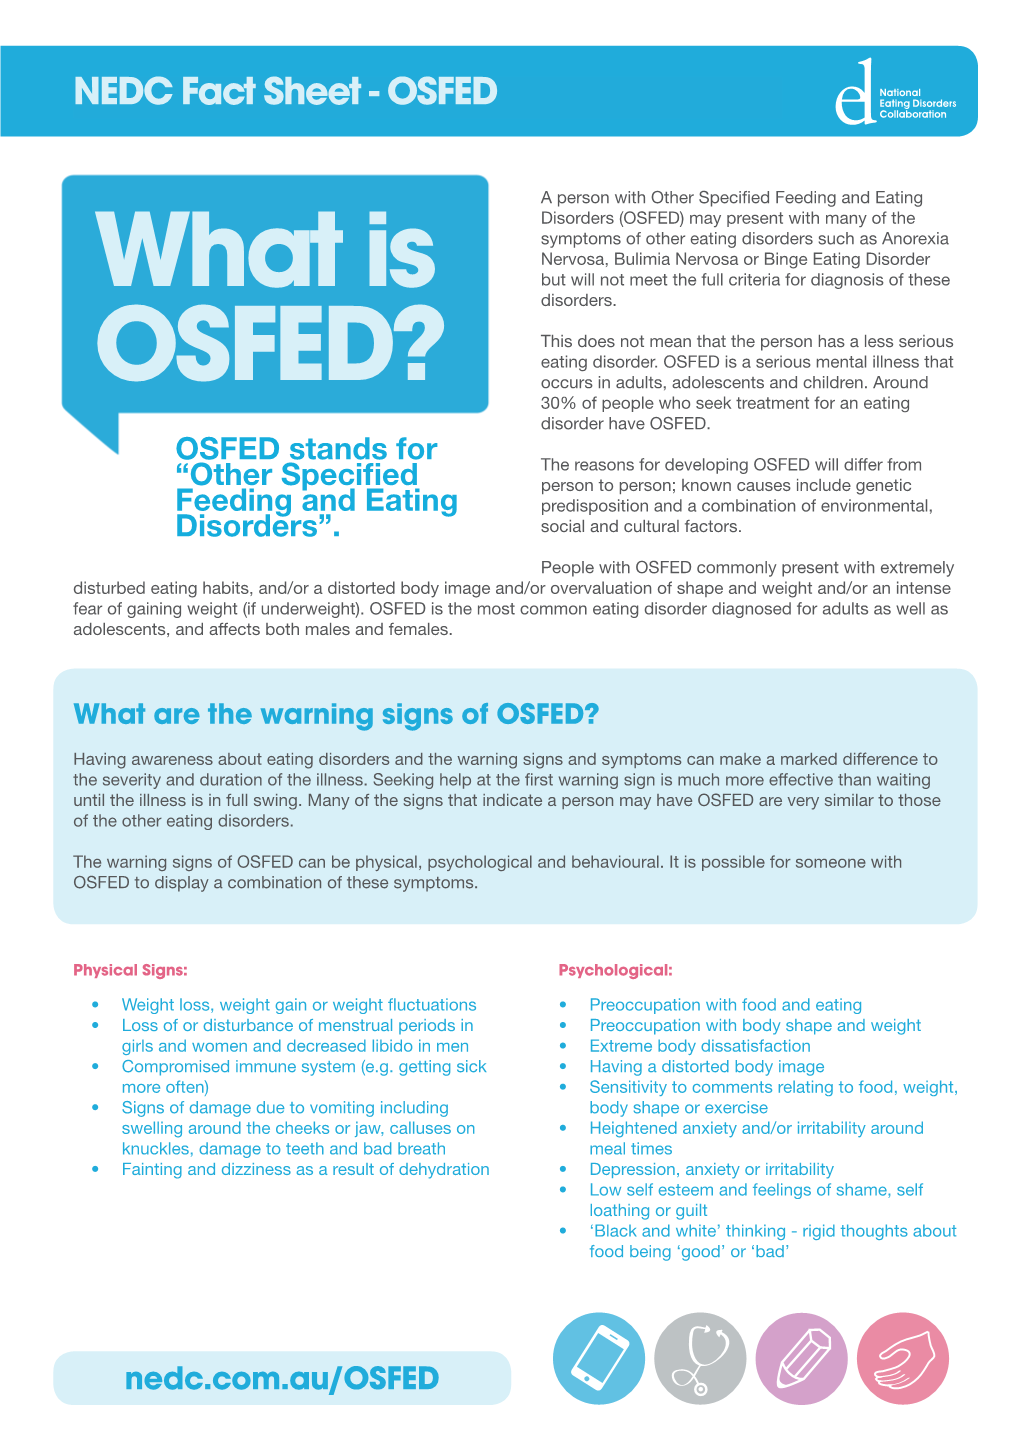 What Is OSFED?